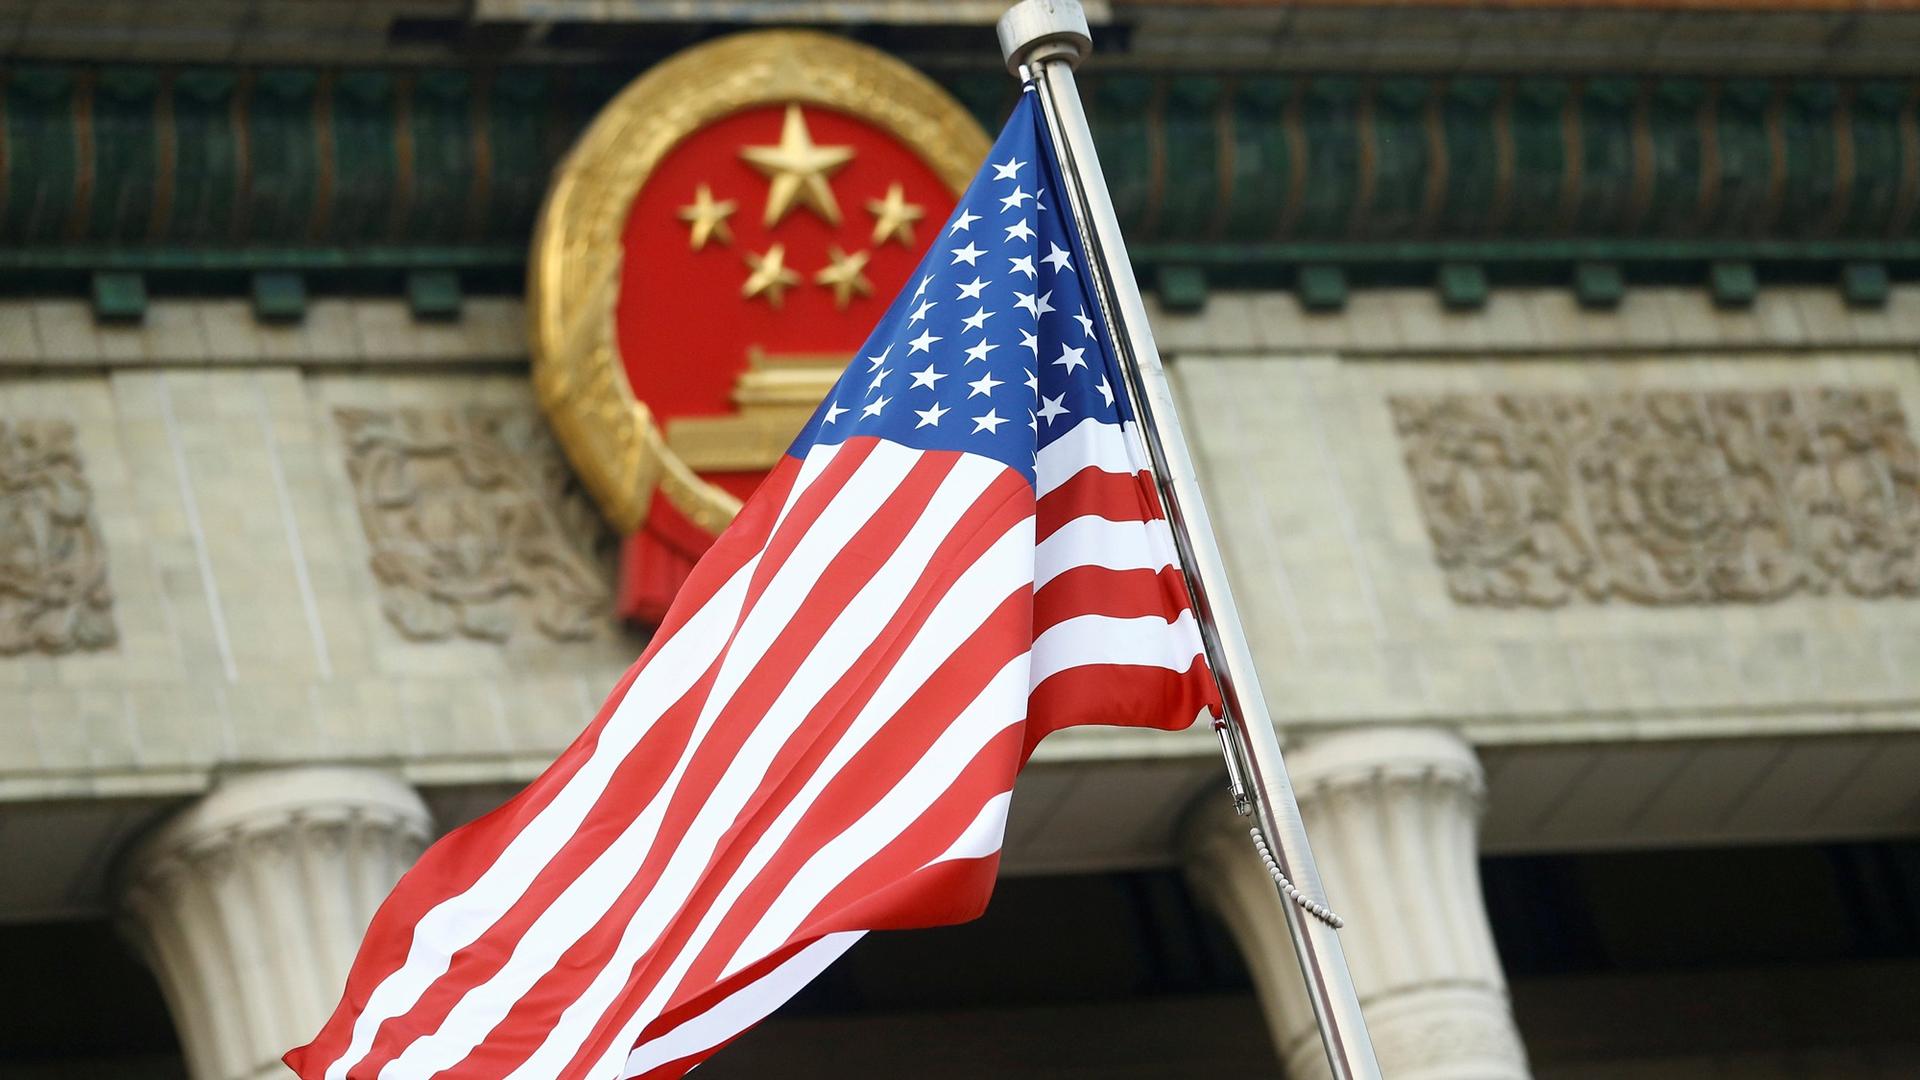 A US flag is seen during a welcoming ceremony in Beijing, China.